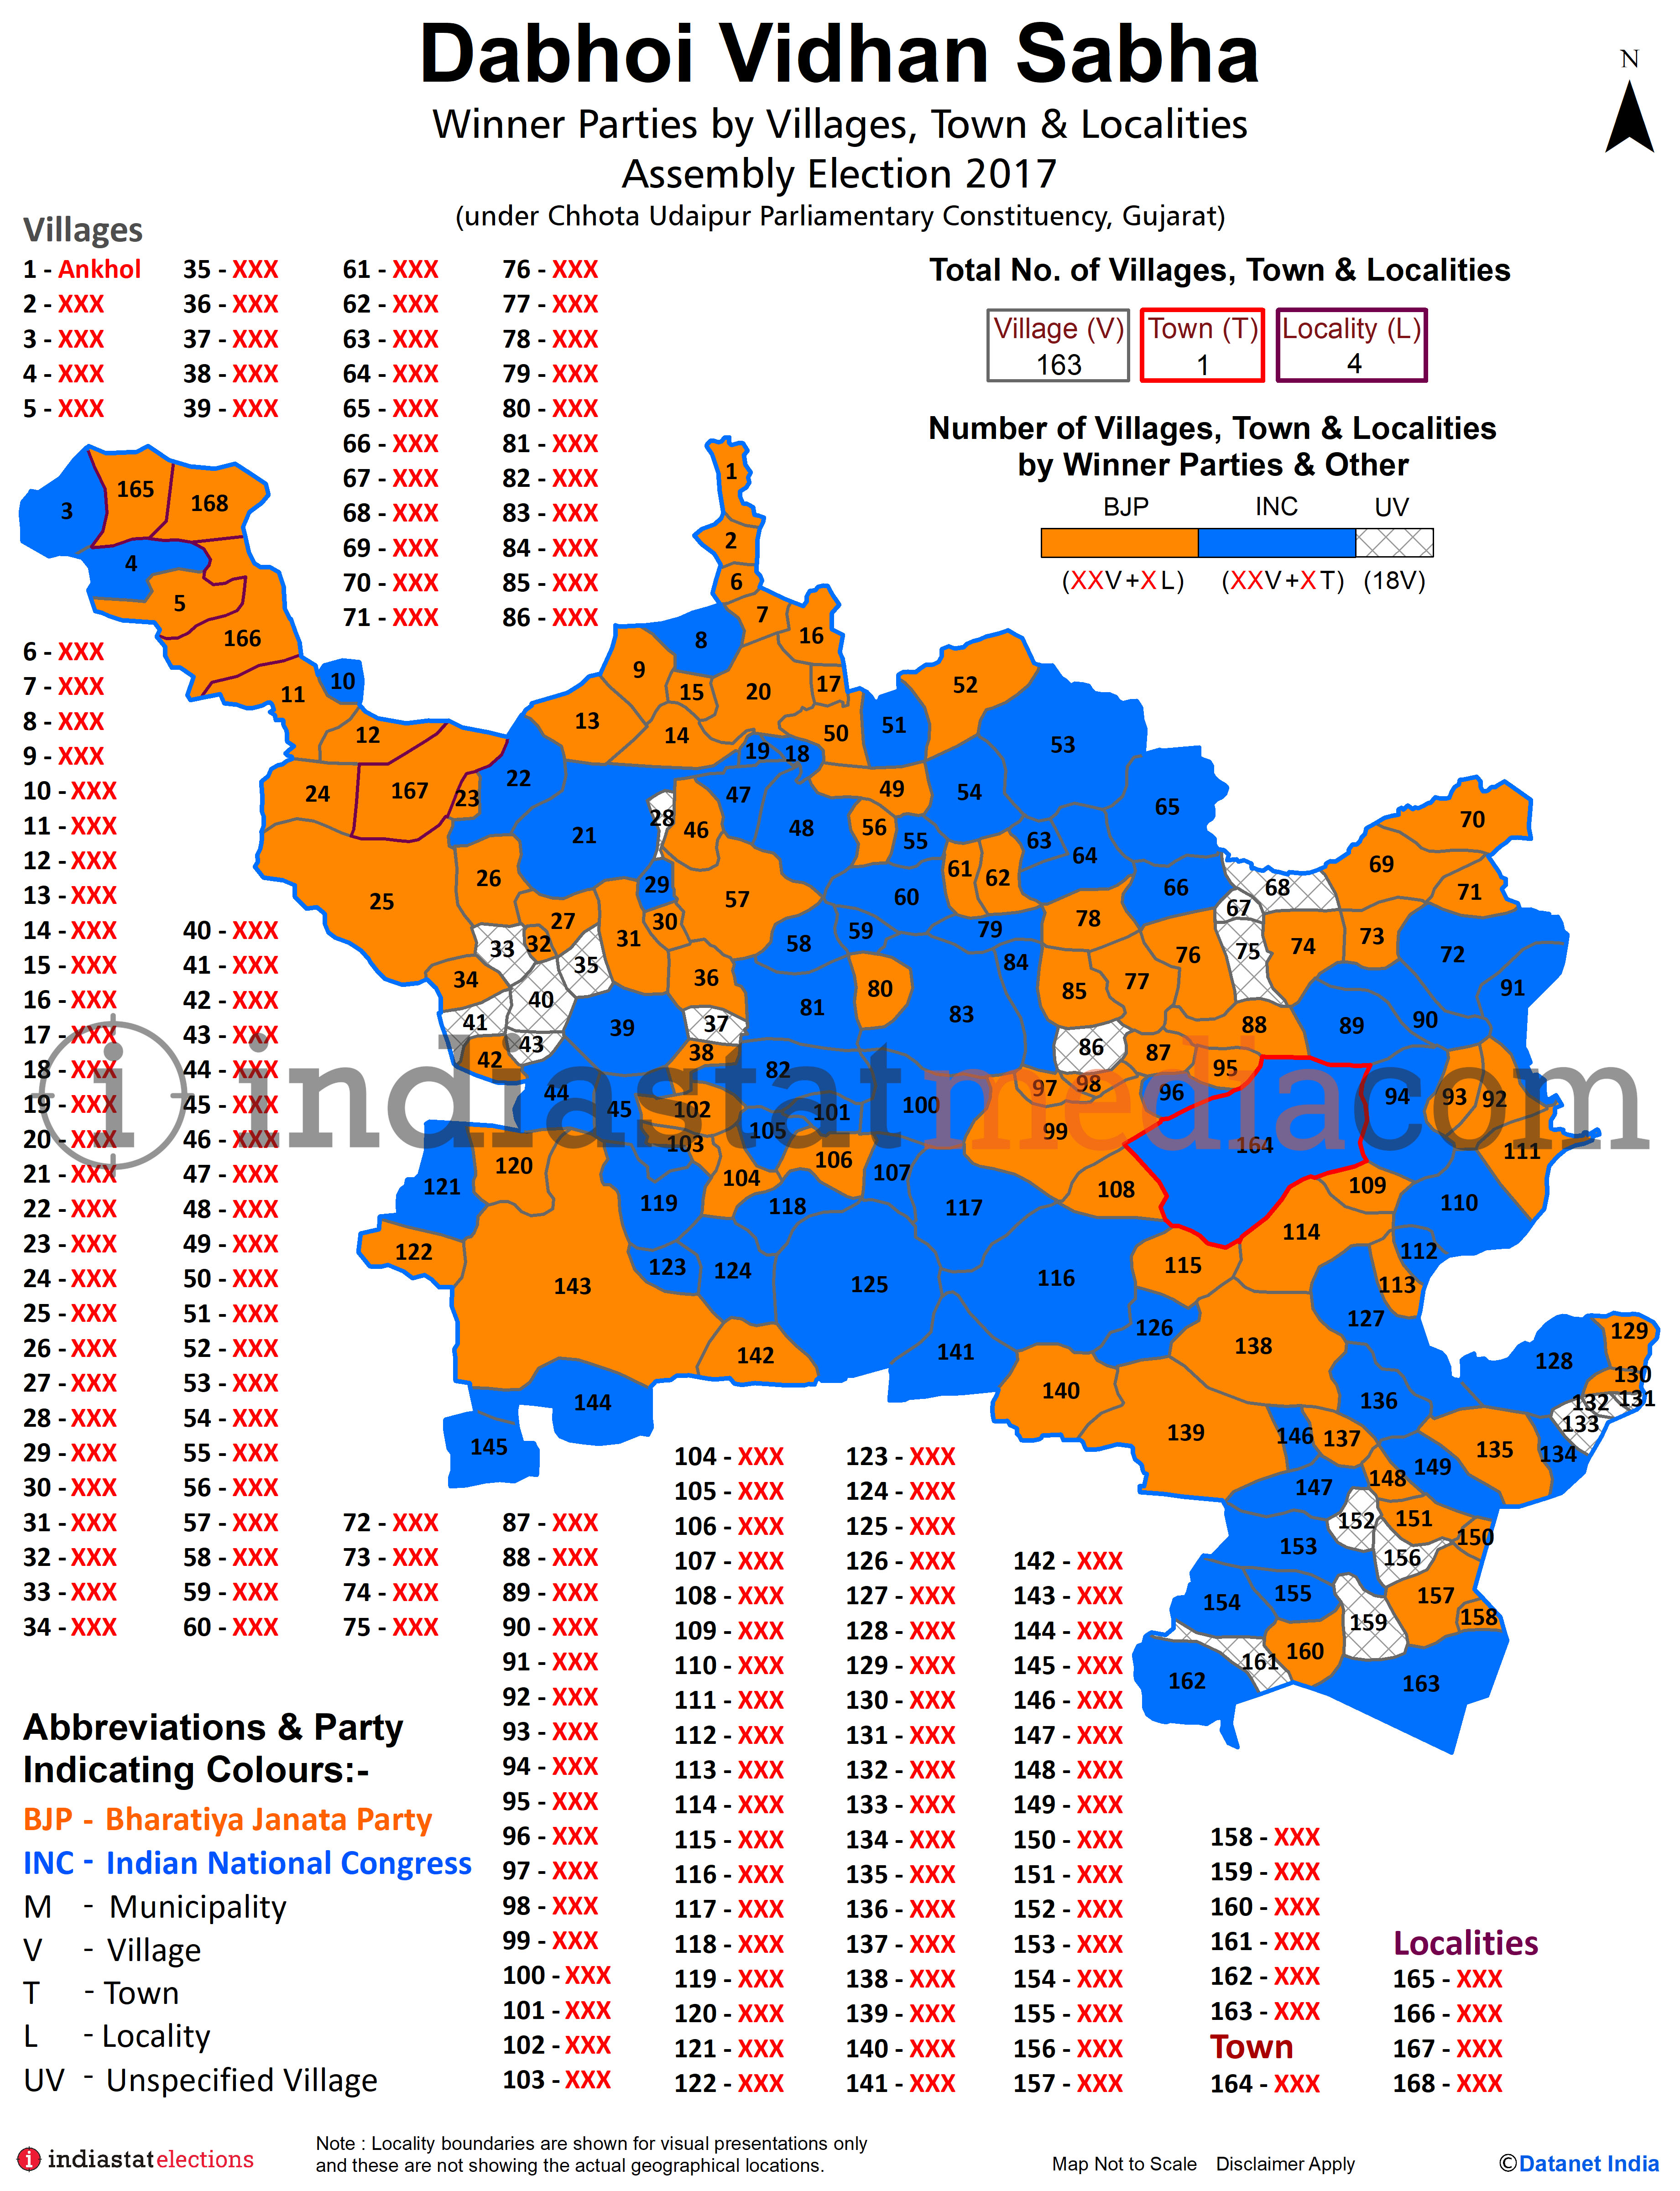 Winner Parties by Villages, Towns and Localities in Dabhoi Assembly Constituency under Chhota Udaipur Parliamentary Constituency in Gujarat (Assembly Election - 2017)